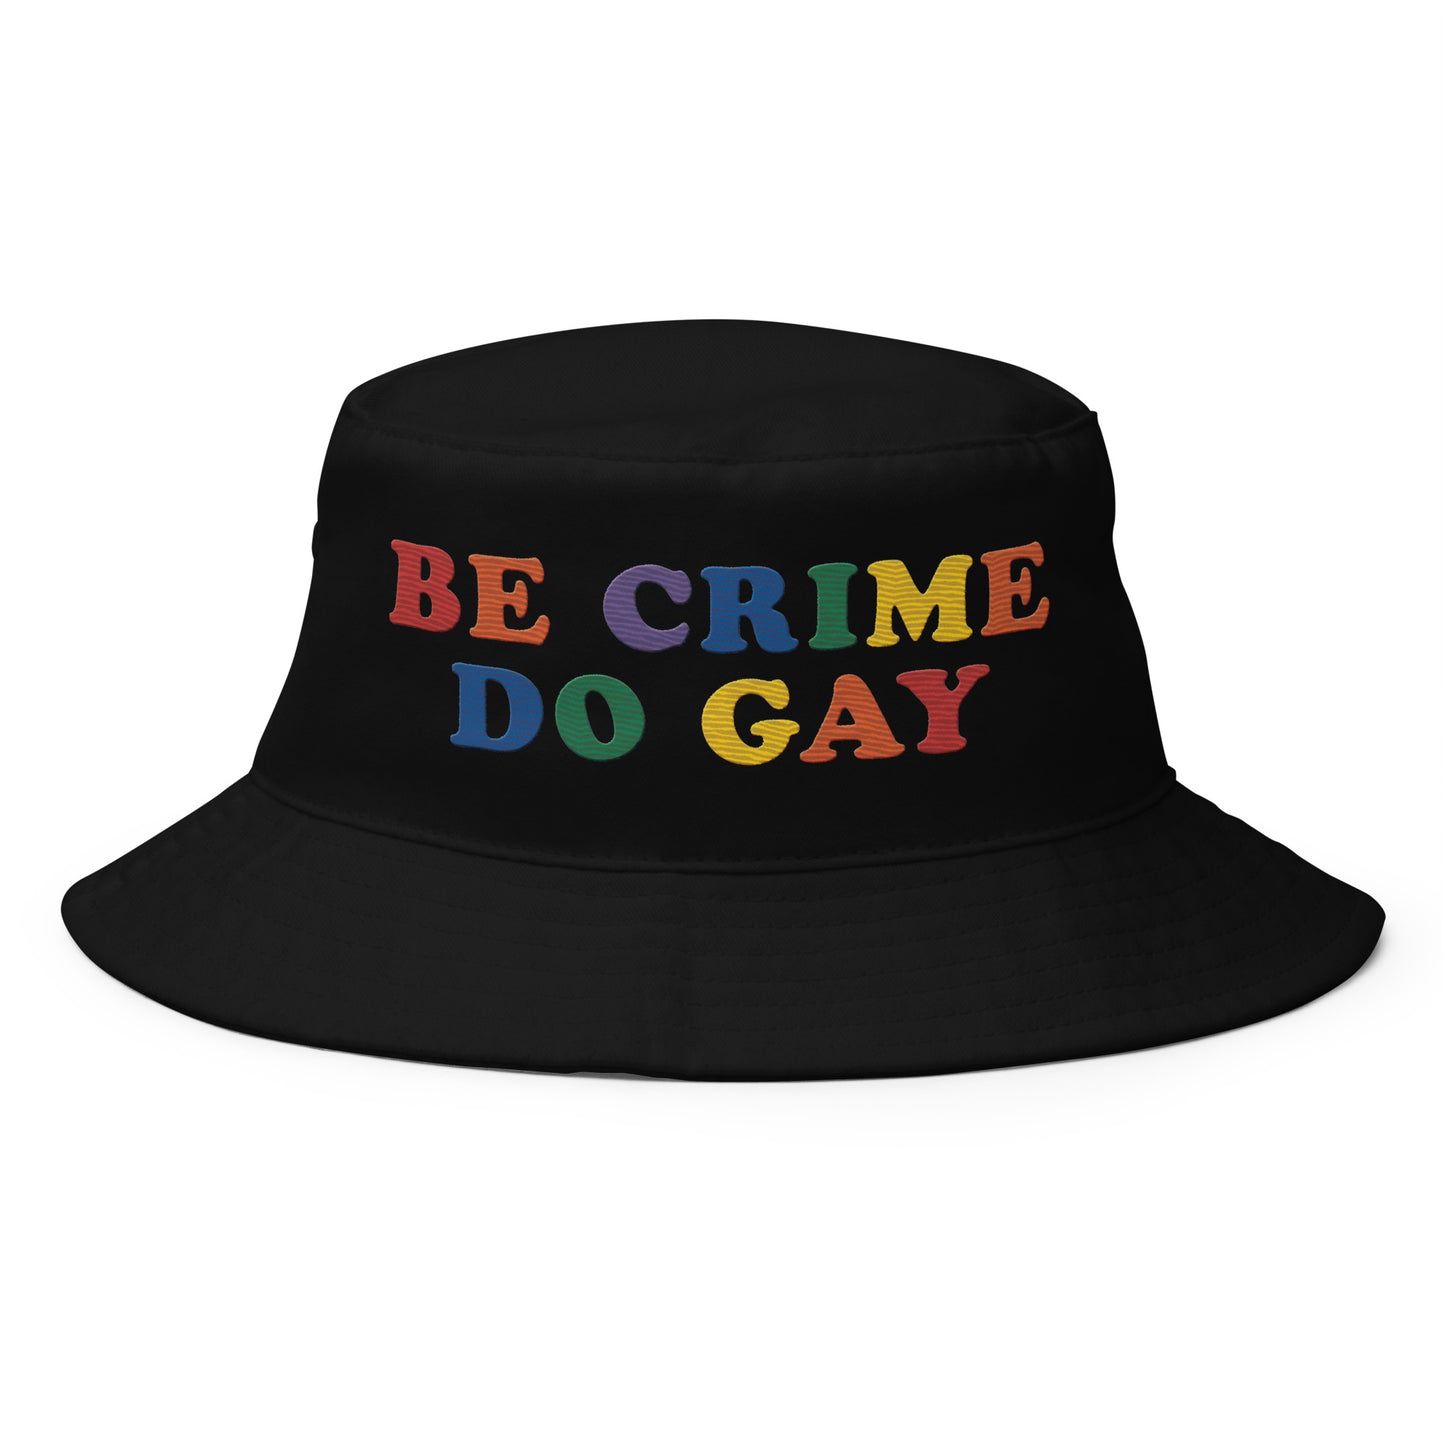 Be Crime Do Gay Bucket Hat